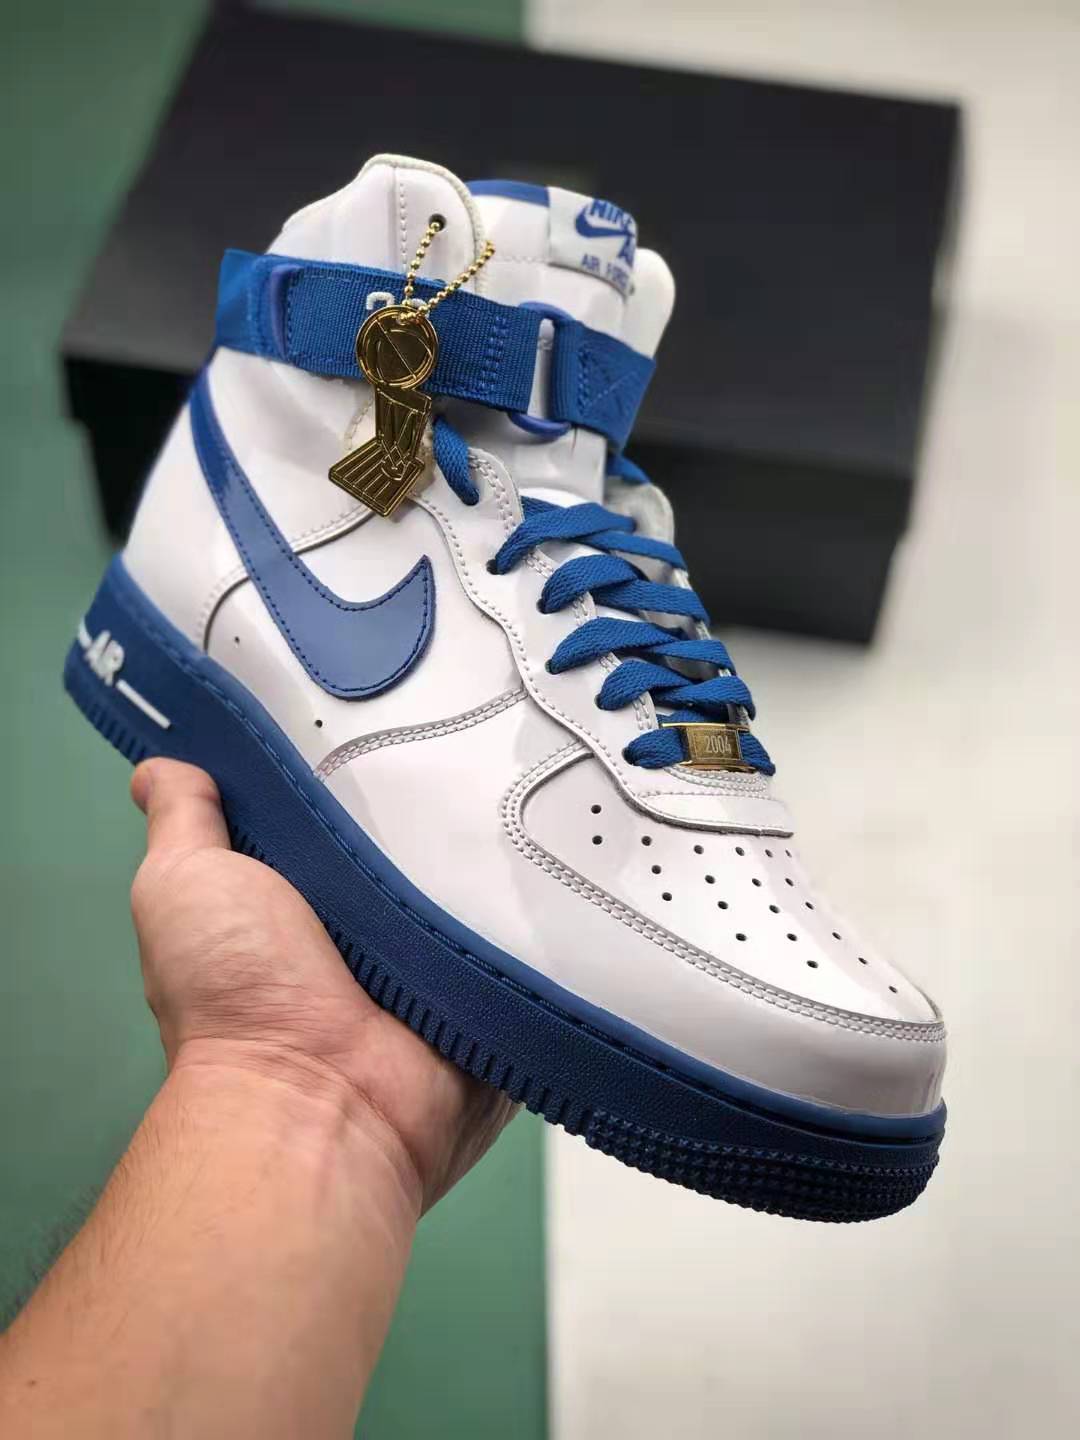 Nike Air Force 1 High Sheed Think 16 Rude Awakening White Blue AQ4229-100 | Authentic Sneakers and Footwear